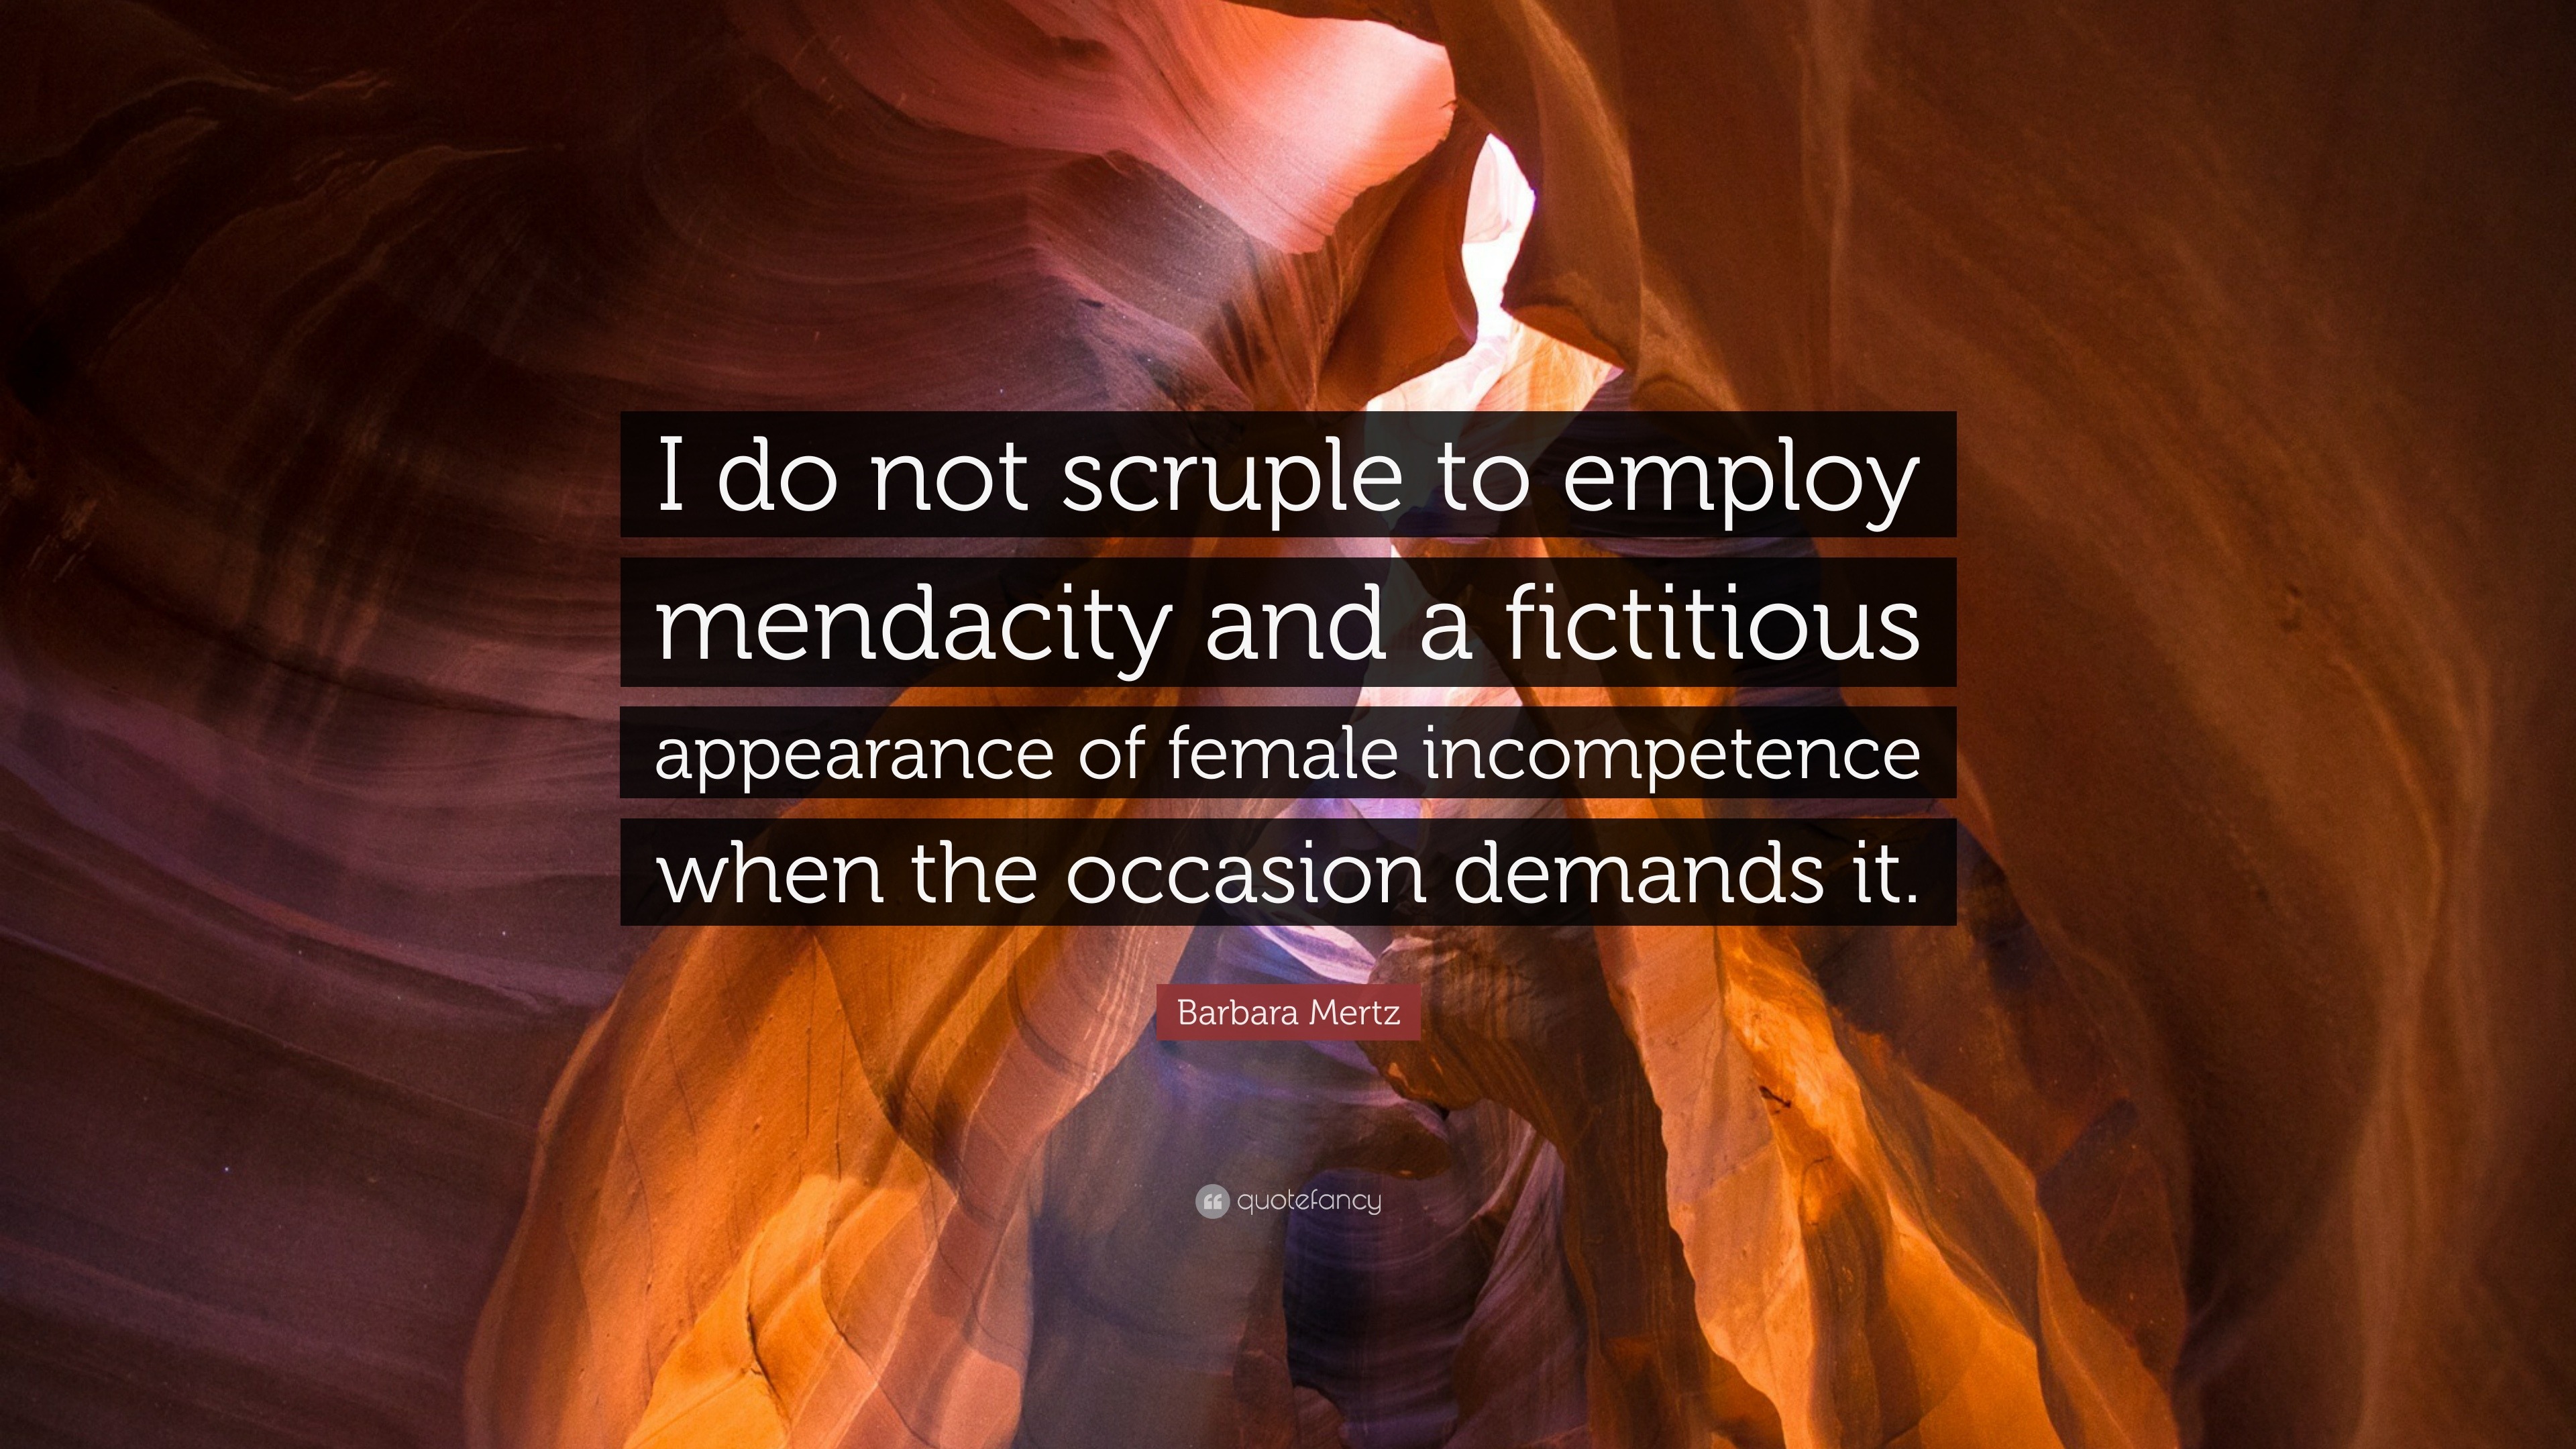 Barbara Mertz Quote I Do Not Scruple To Employ Mendacity And A Fictitious Appearance Of Female